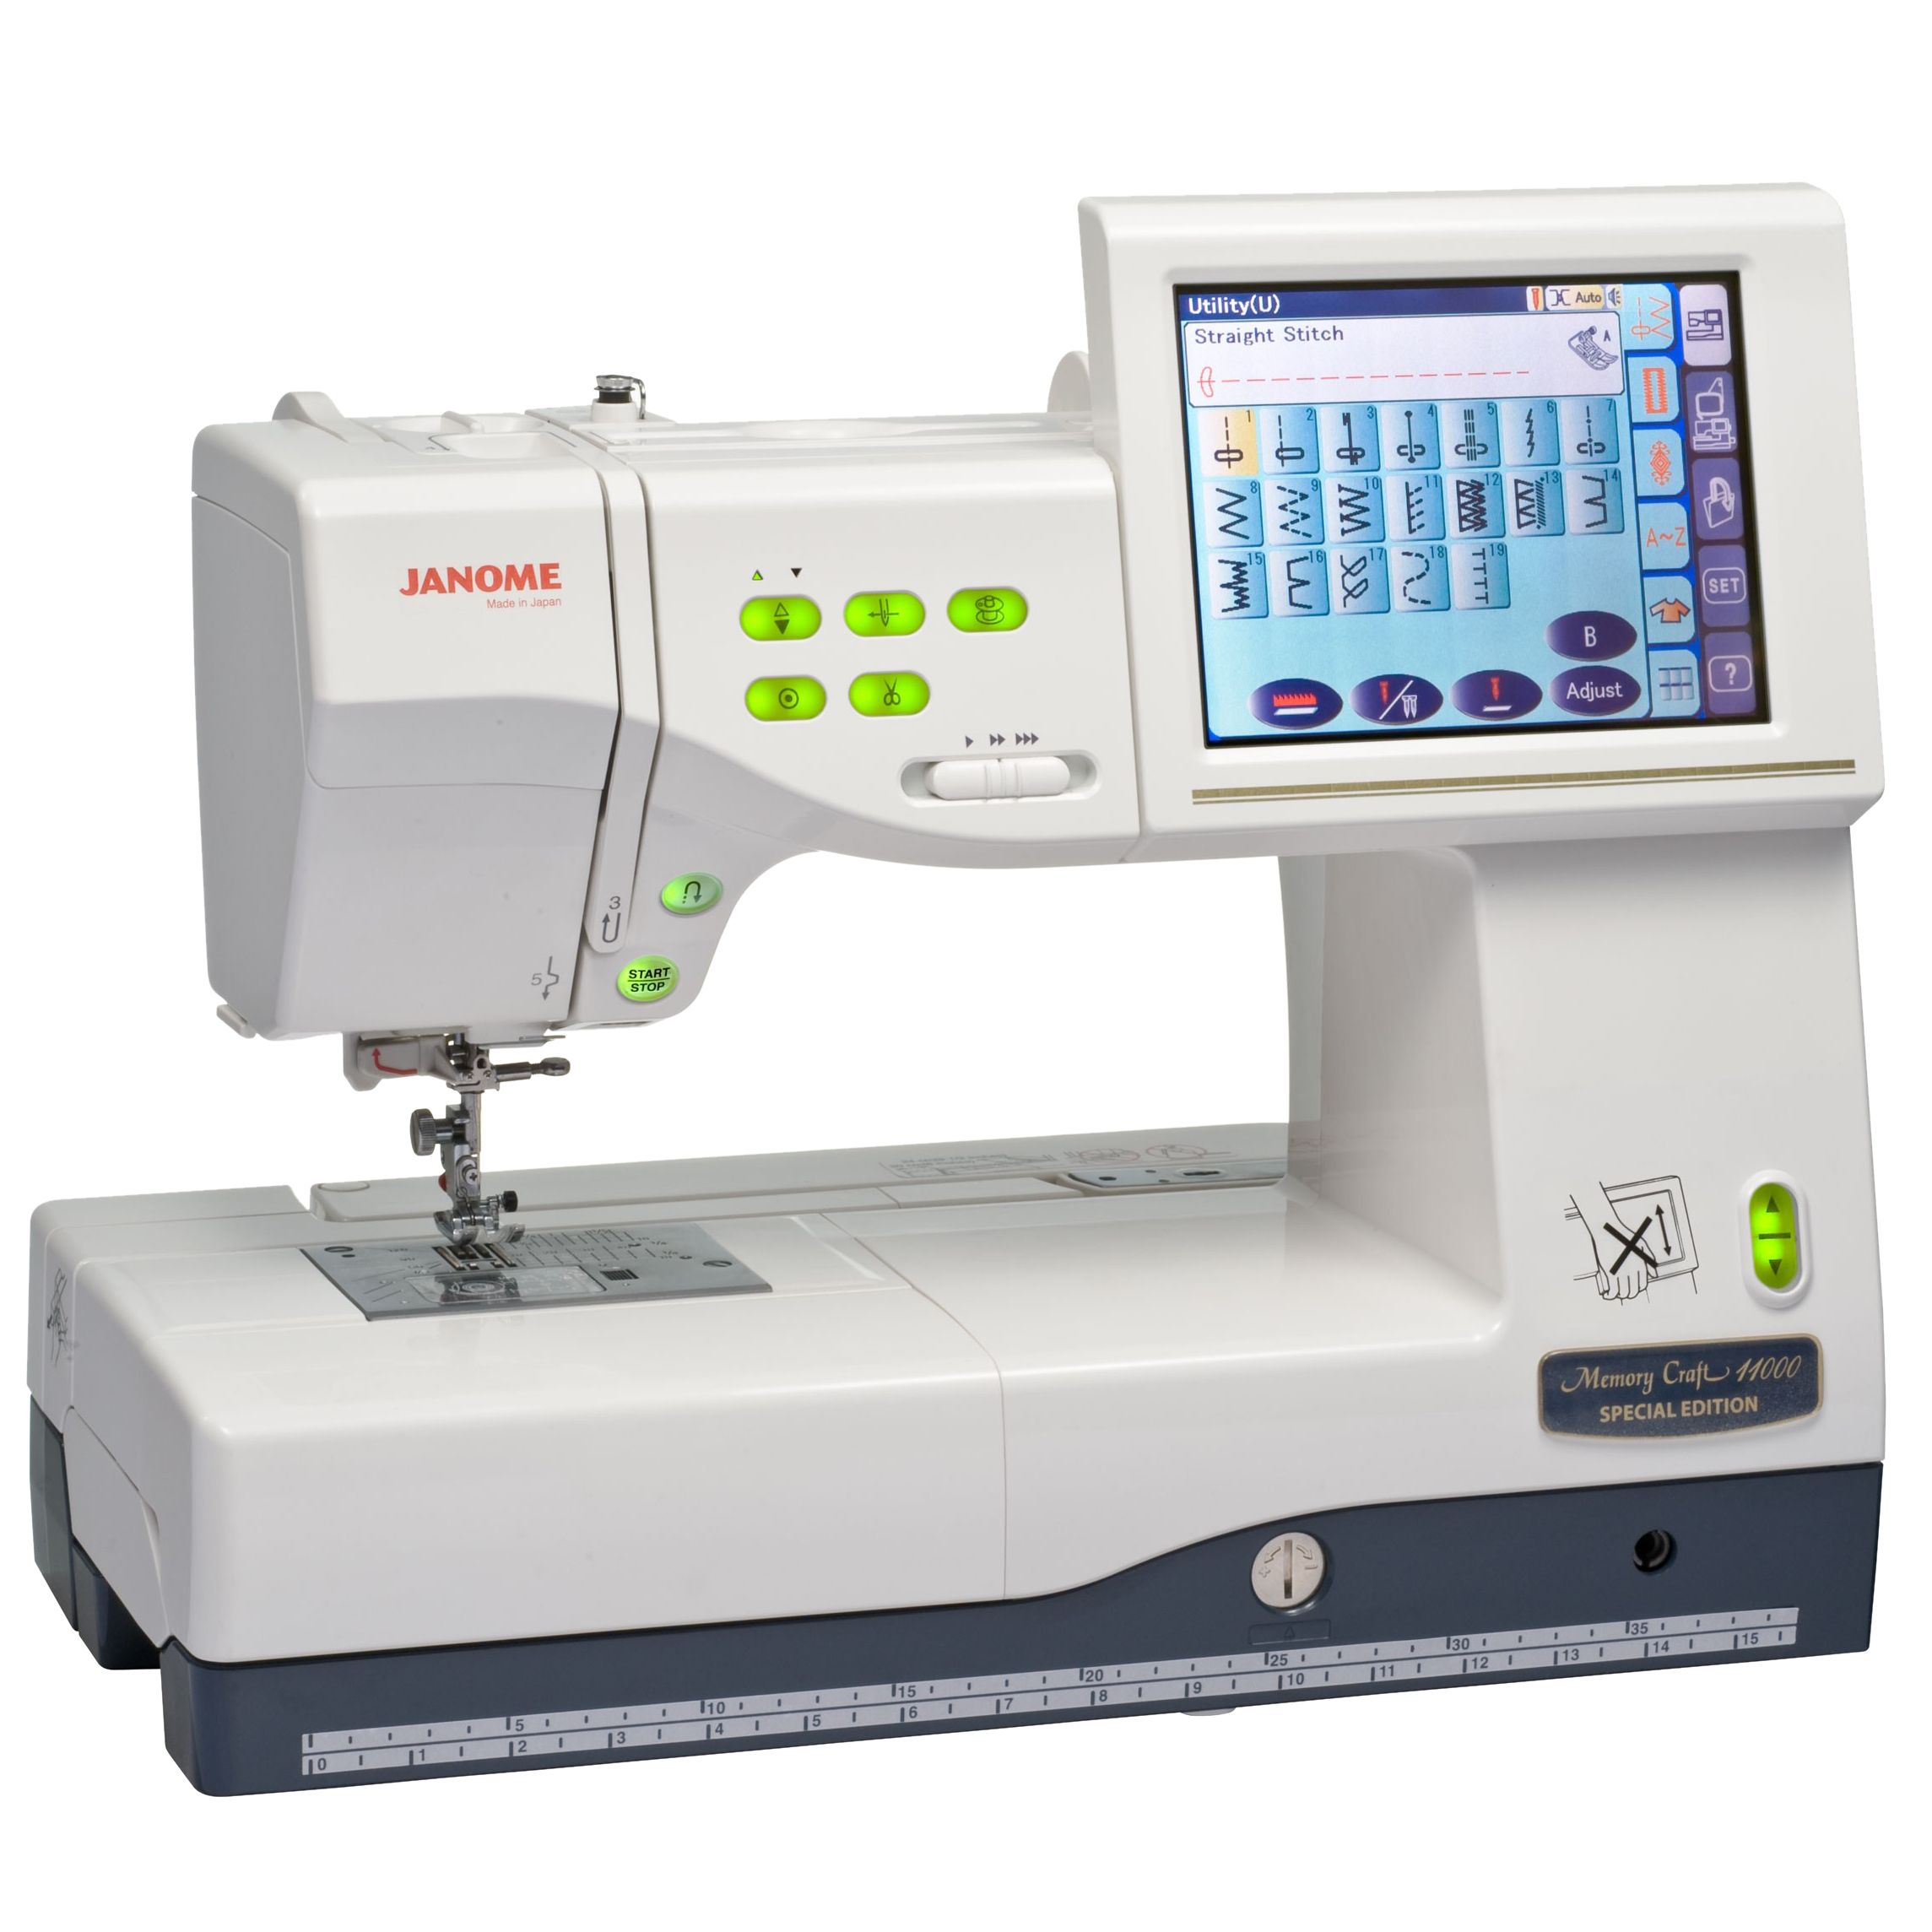 Janome Memory Craft 11000 Sewing & Embroidery Machine, Special Edition at John Lewis